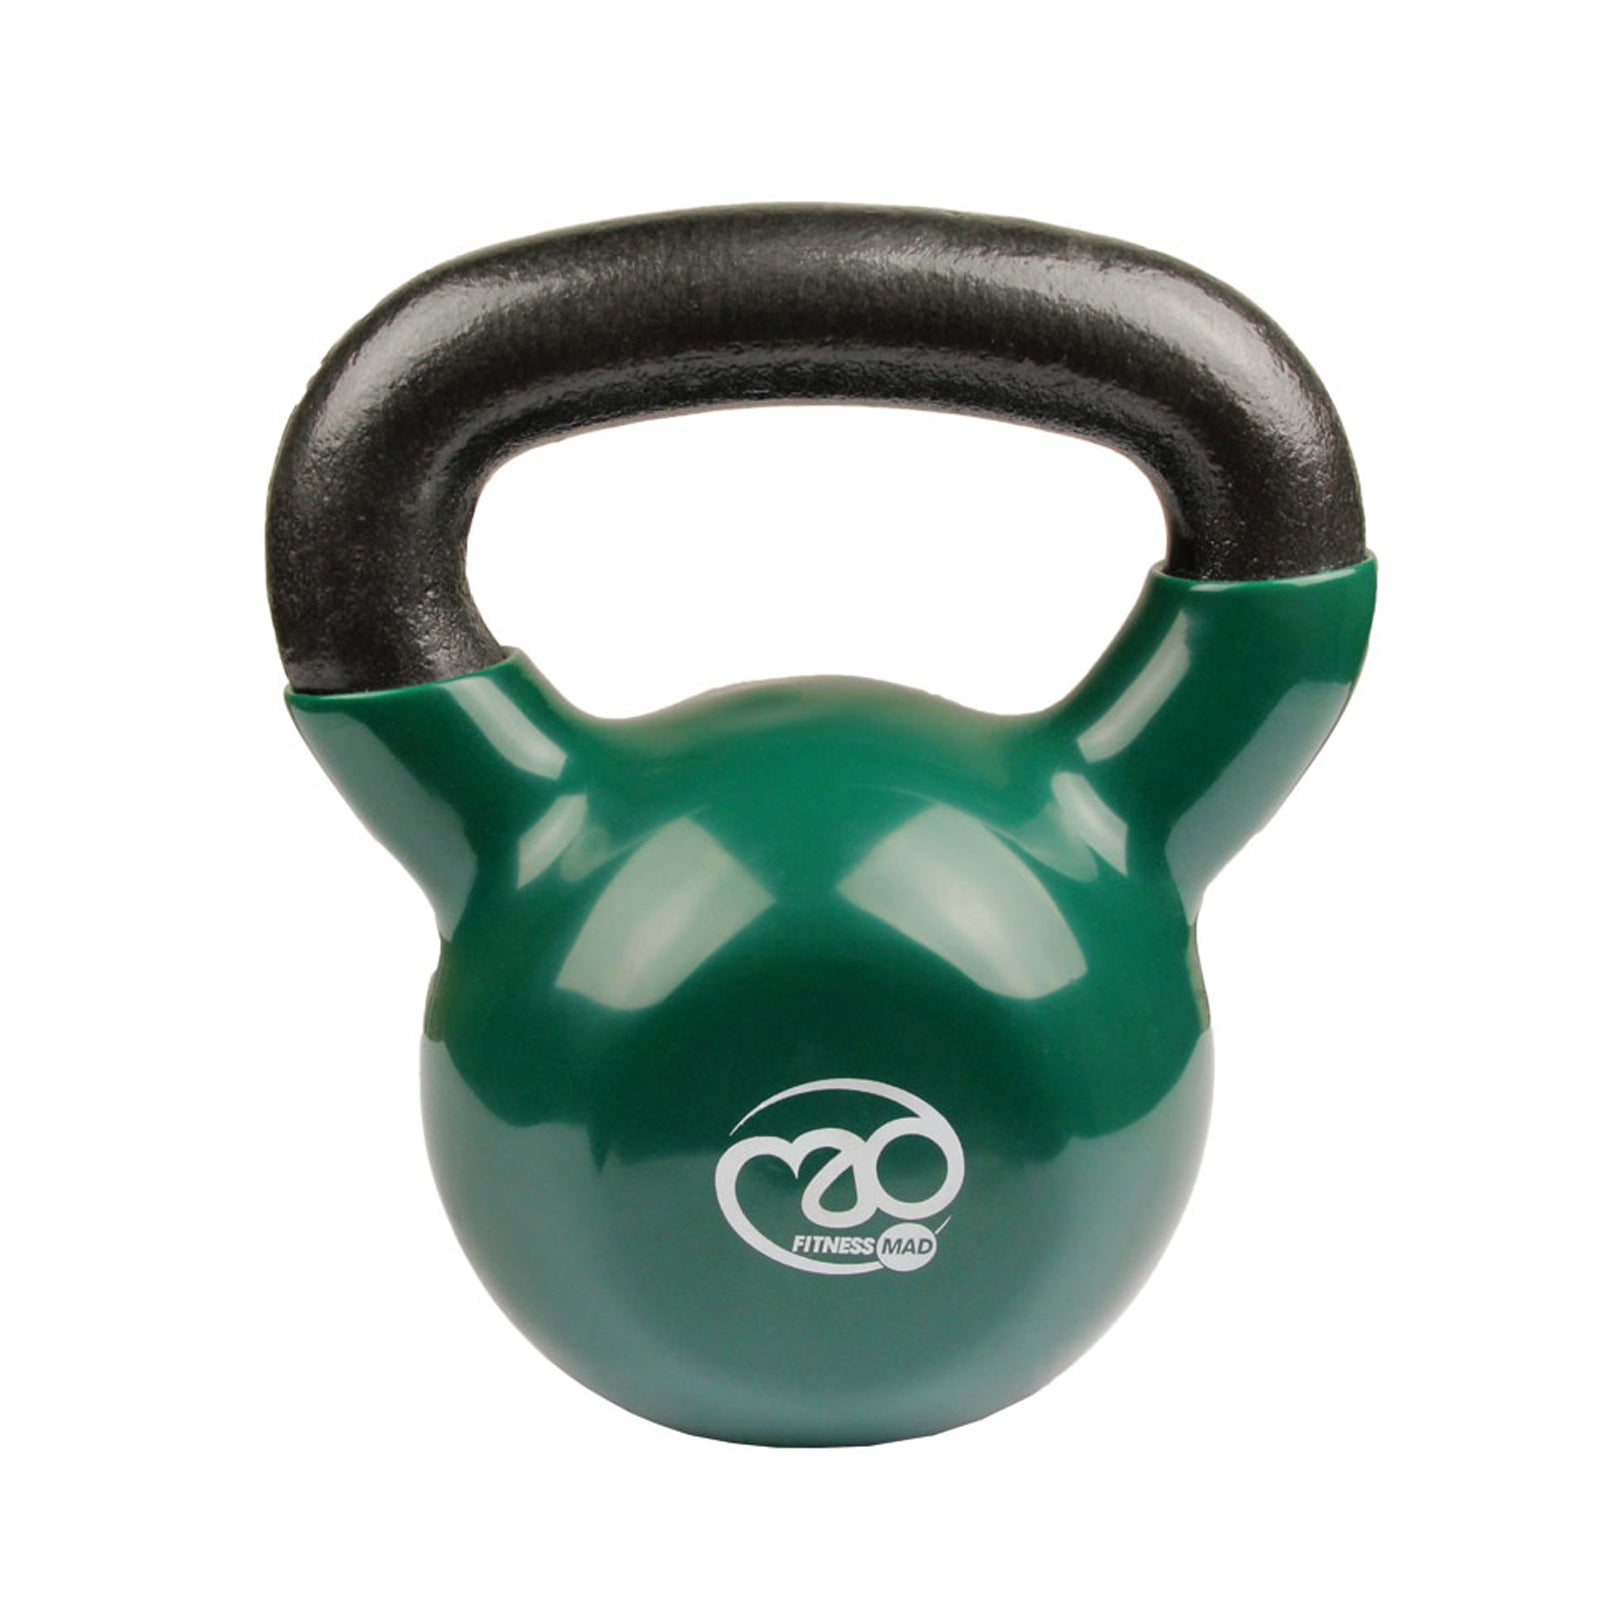 Kettlebell Green Home Workout Fitness Mad Alternate 1